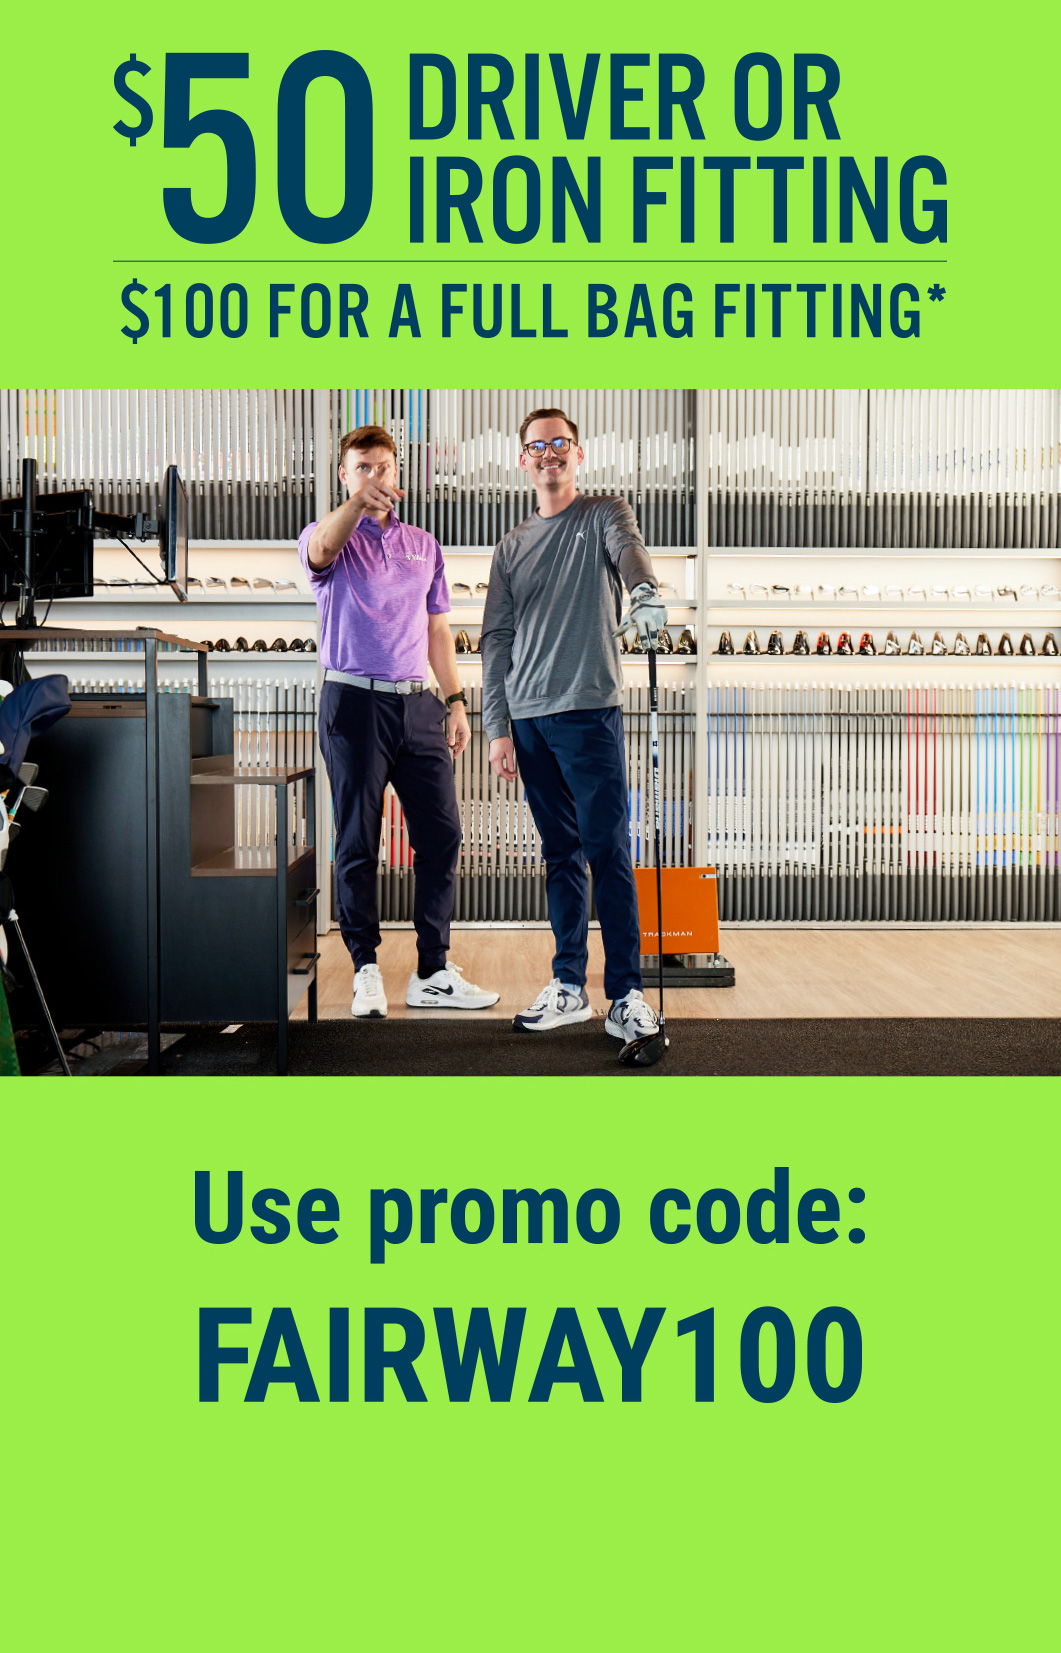 $100 FULL BAG FITTING OR $50 for all other fittings with purchase*